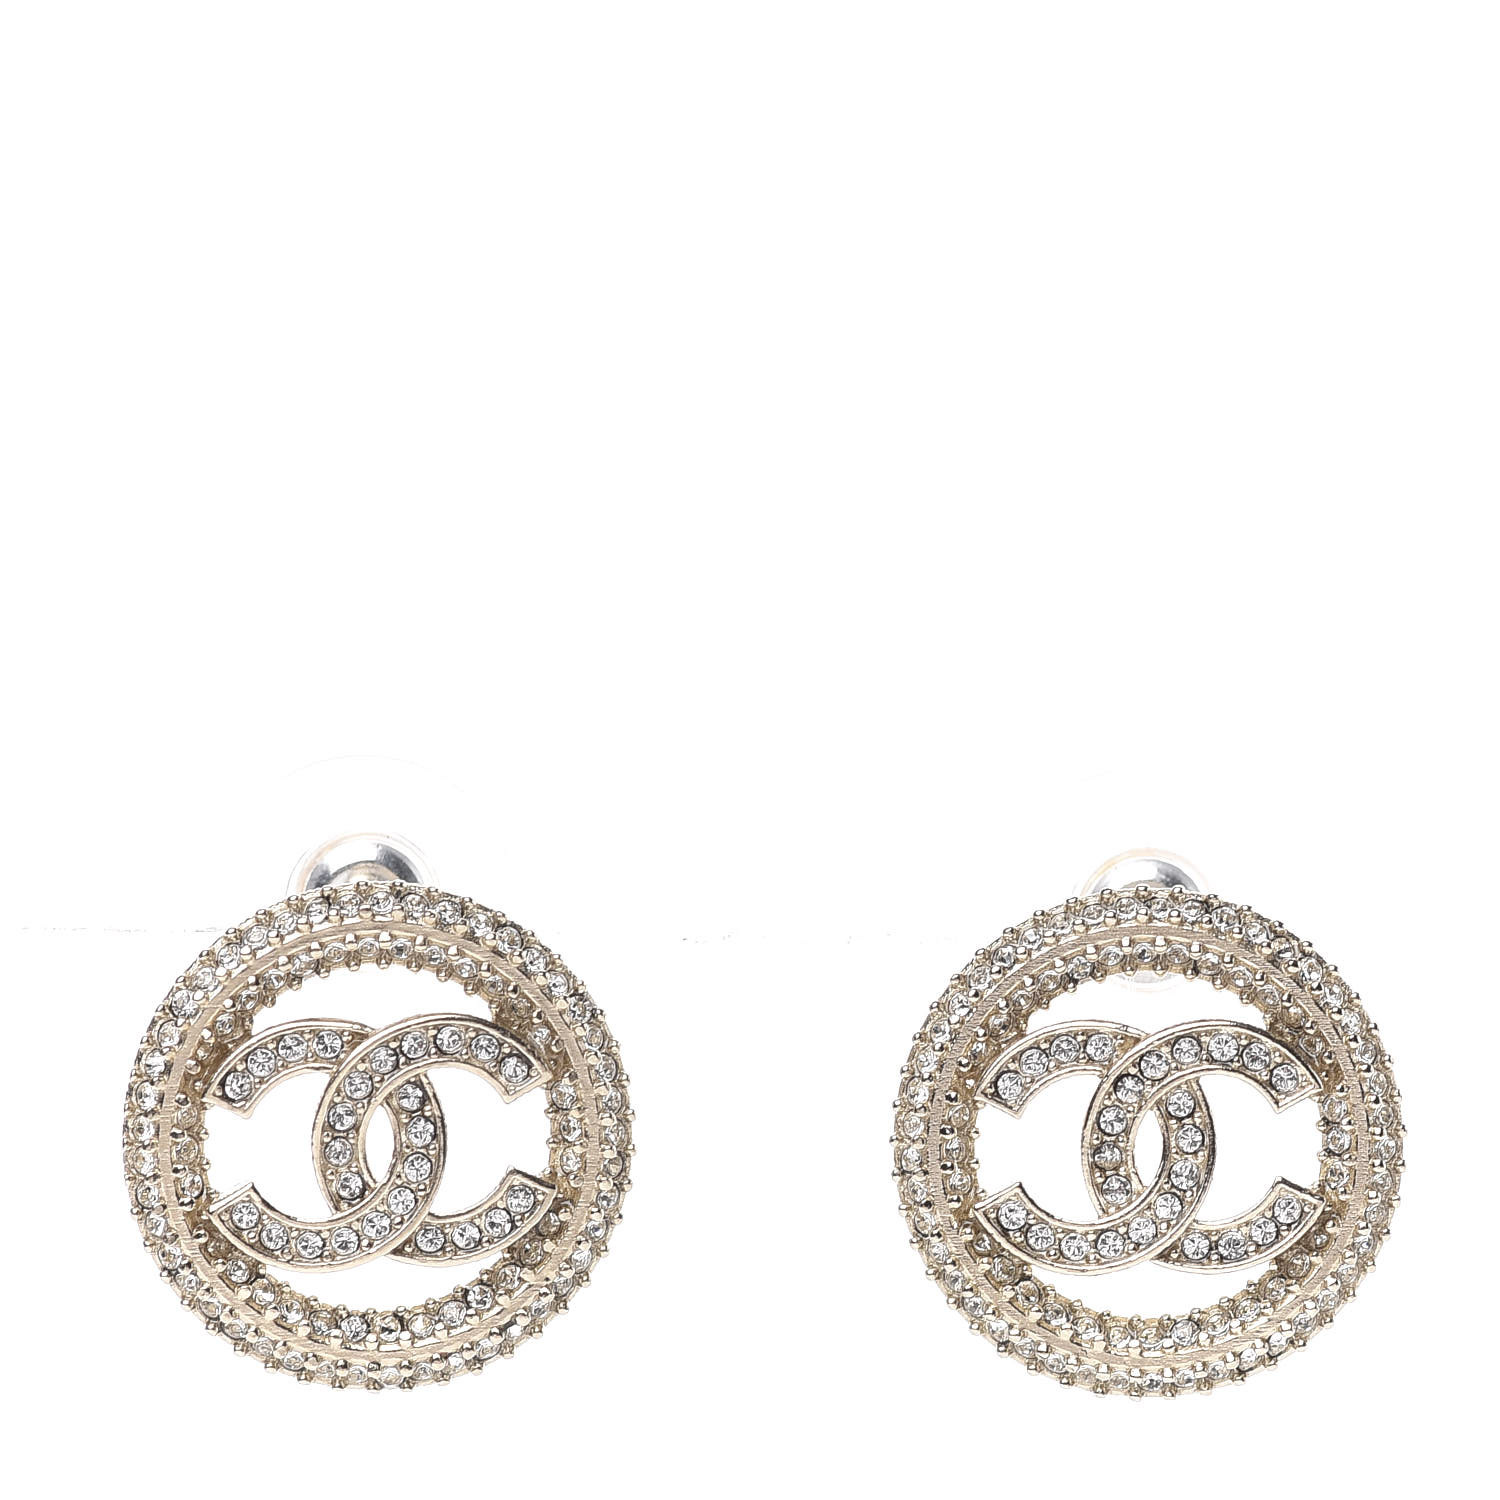 CHANEL Crystal CC Vendome Round Earrings Gold 600021 | FASHIONPHILE